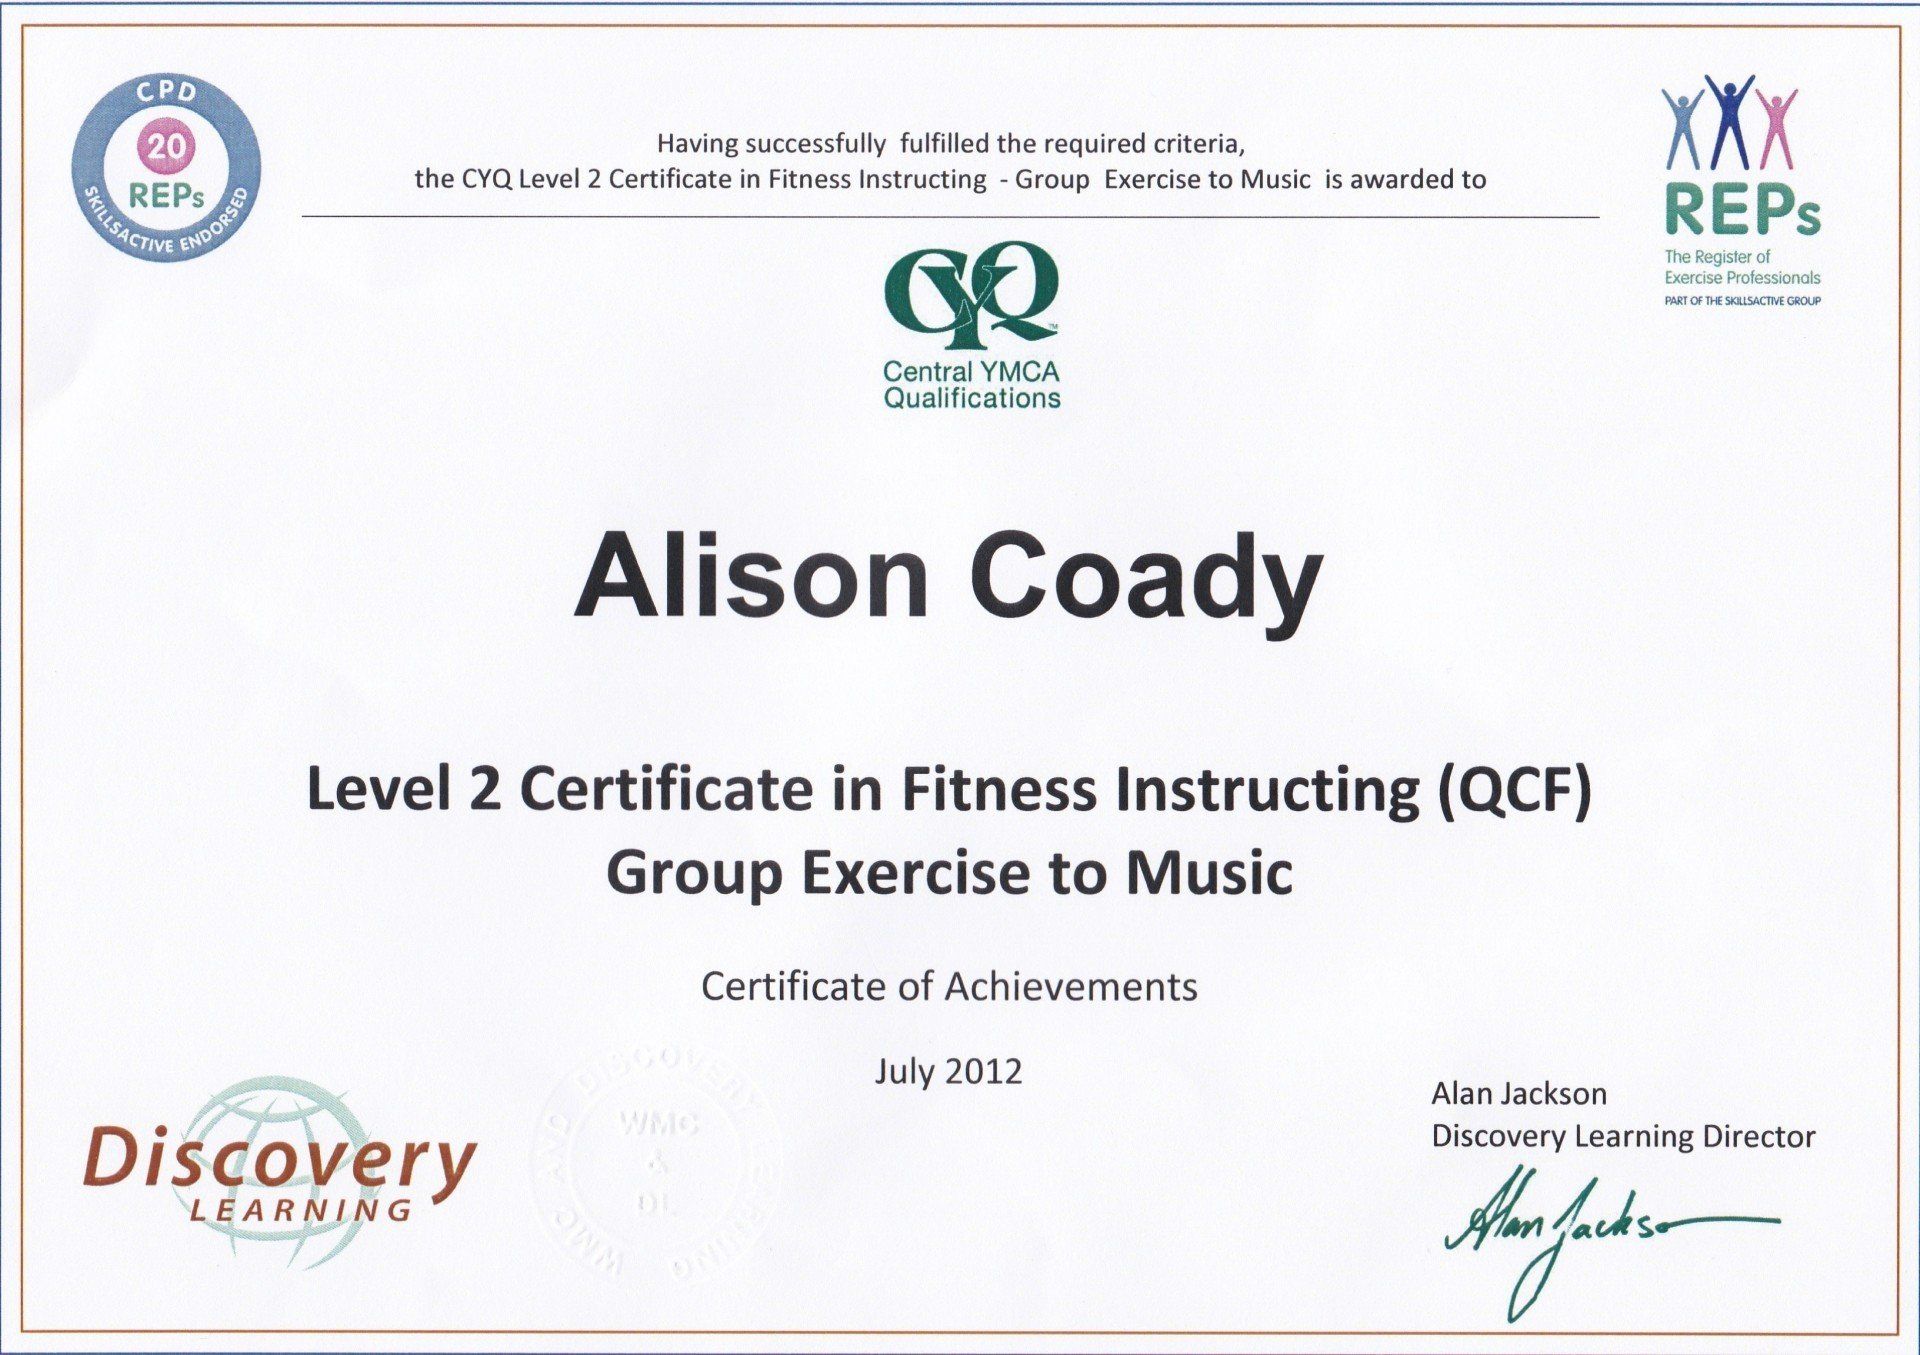 Level 2 Certificate in Fitness Instructing, Group Excercise to Music